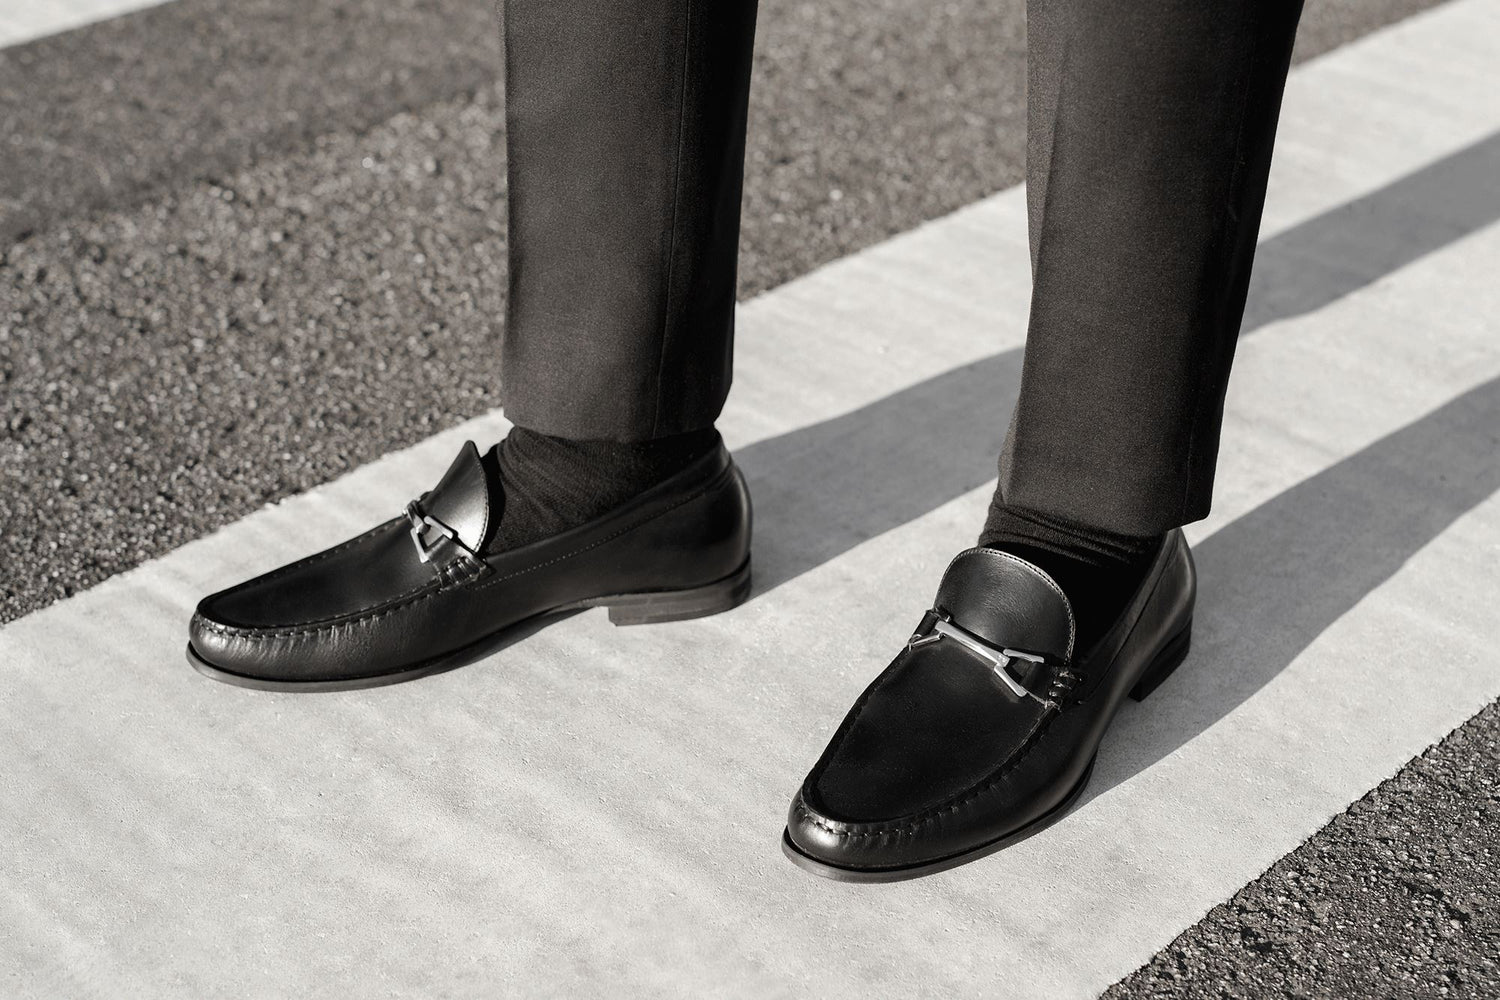 The Bit Loafer: Stand out the right way